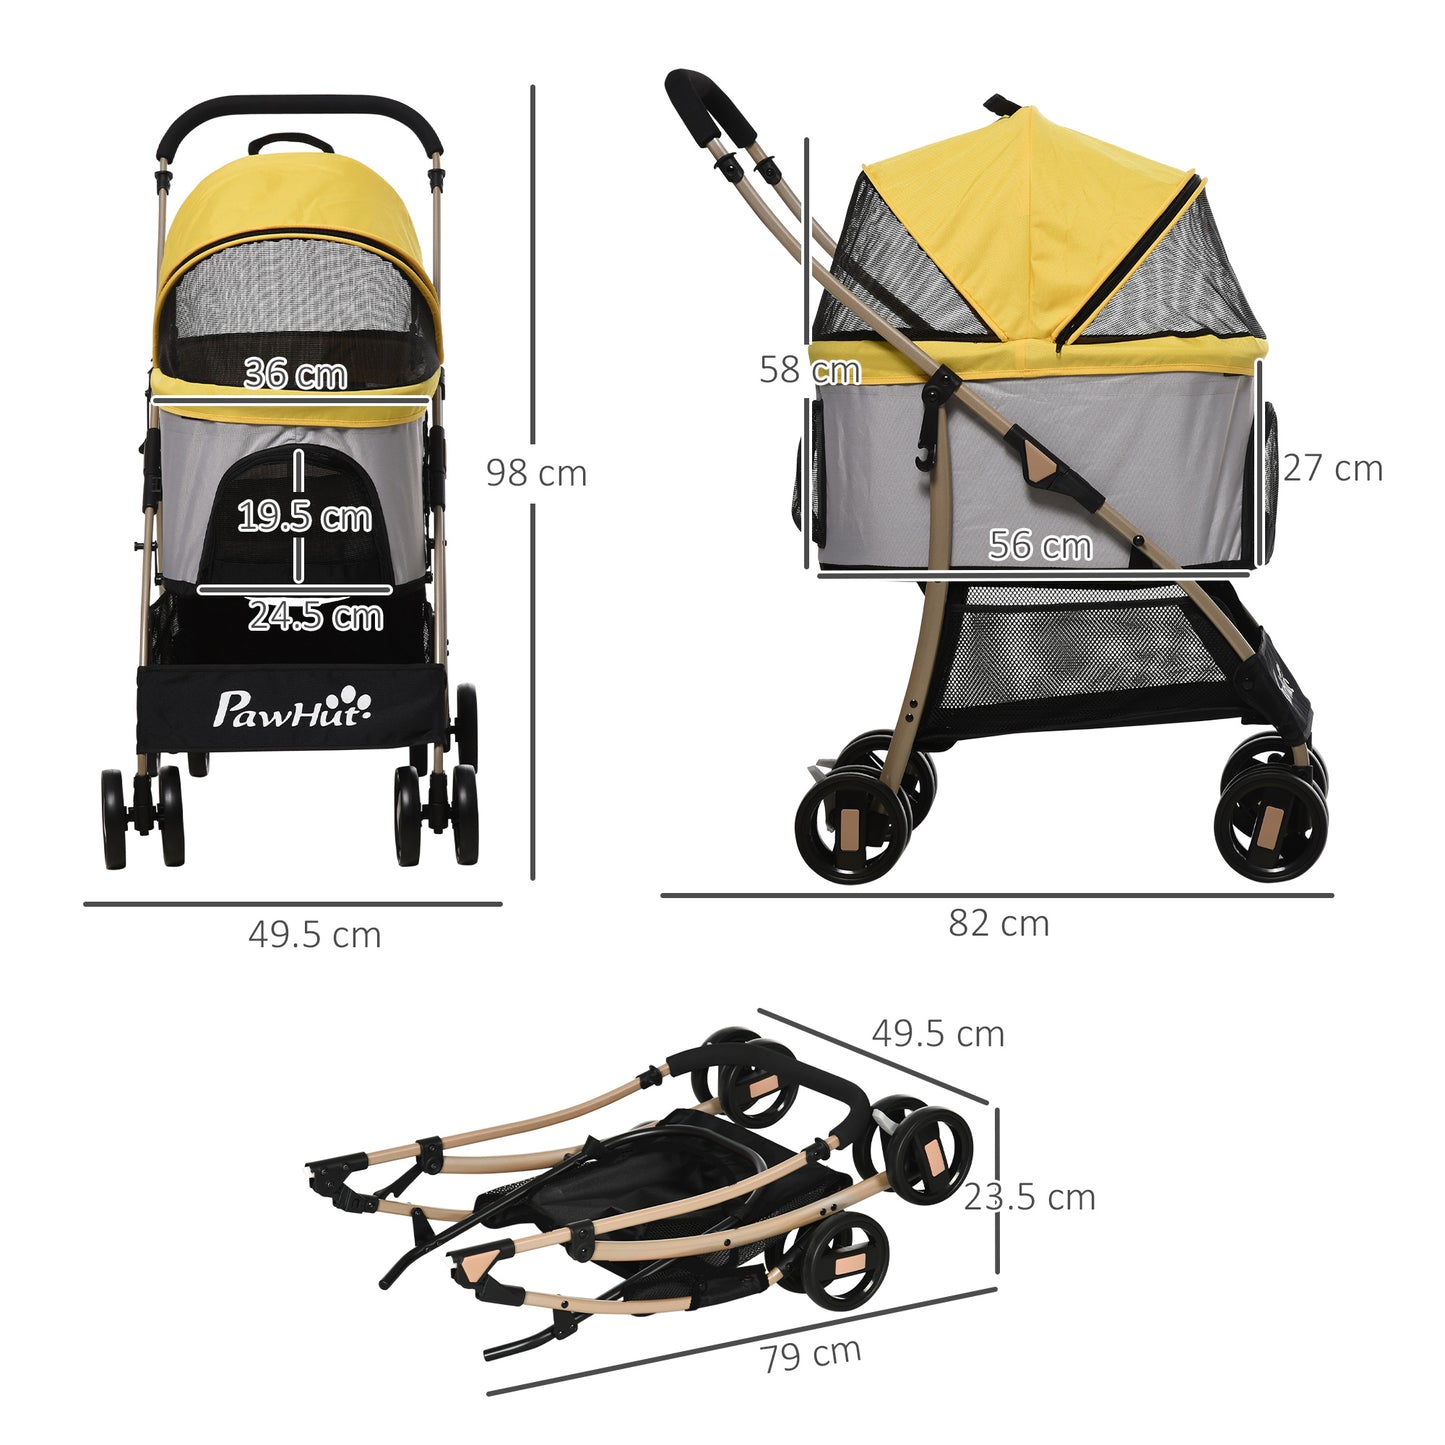 PawHut Detachable Pet Stroller, 3-In-1 Dog Cat Travel Carriage, Foldable Carrying Bag with Universal Wheel Brake Canopy Basket Storage Bag, Yellow